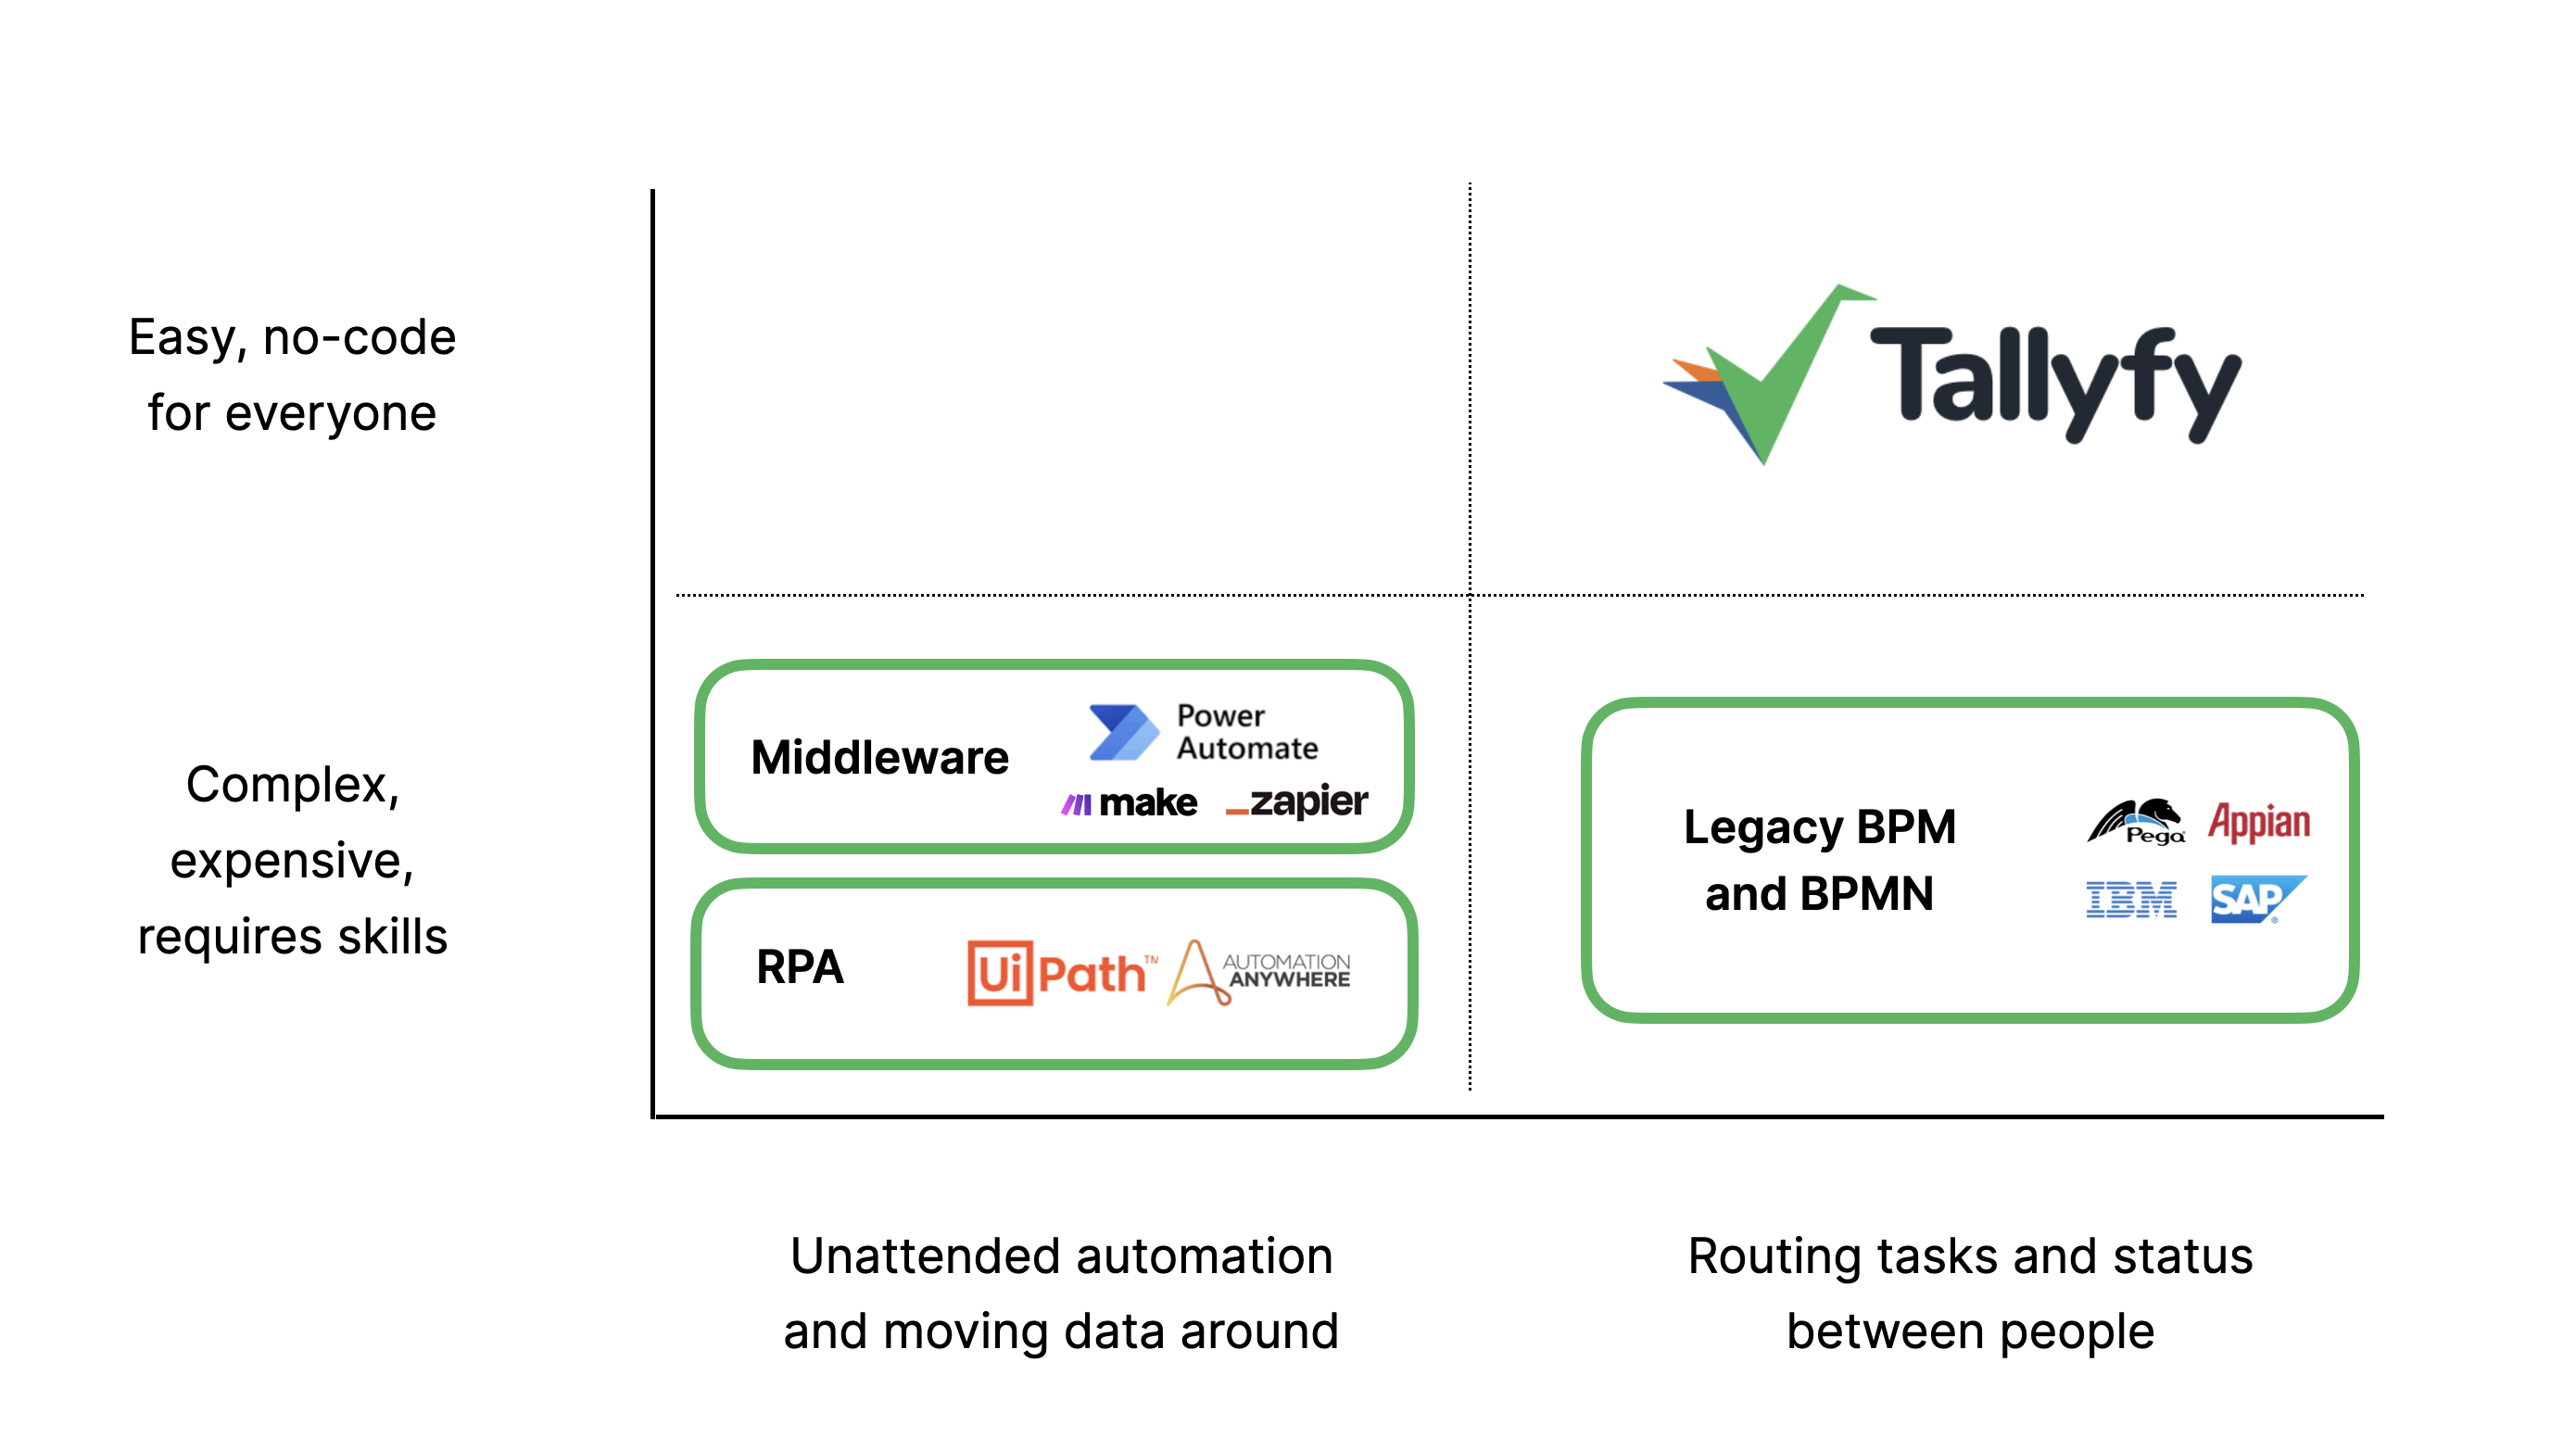 Where Tallyfy fits in the workflow automation world